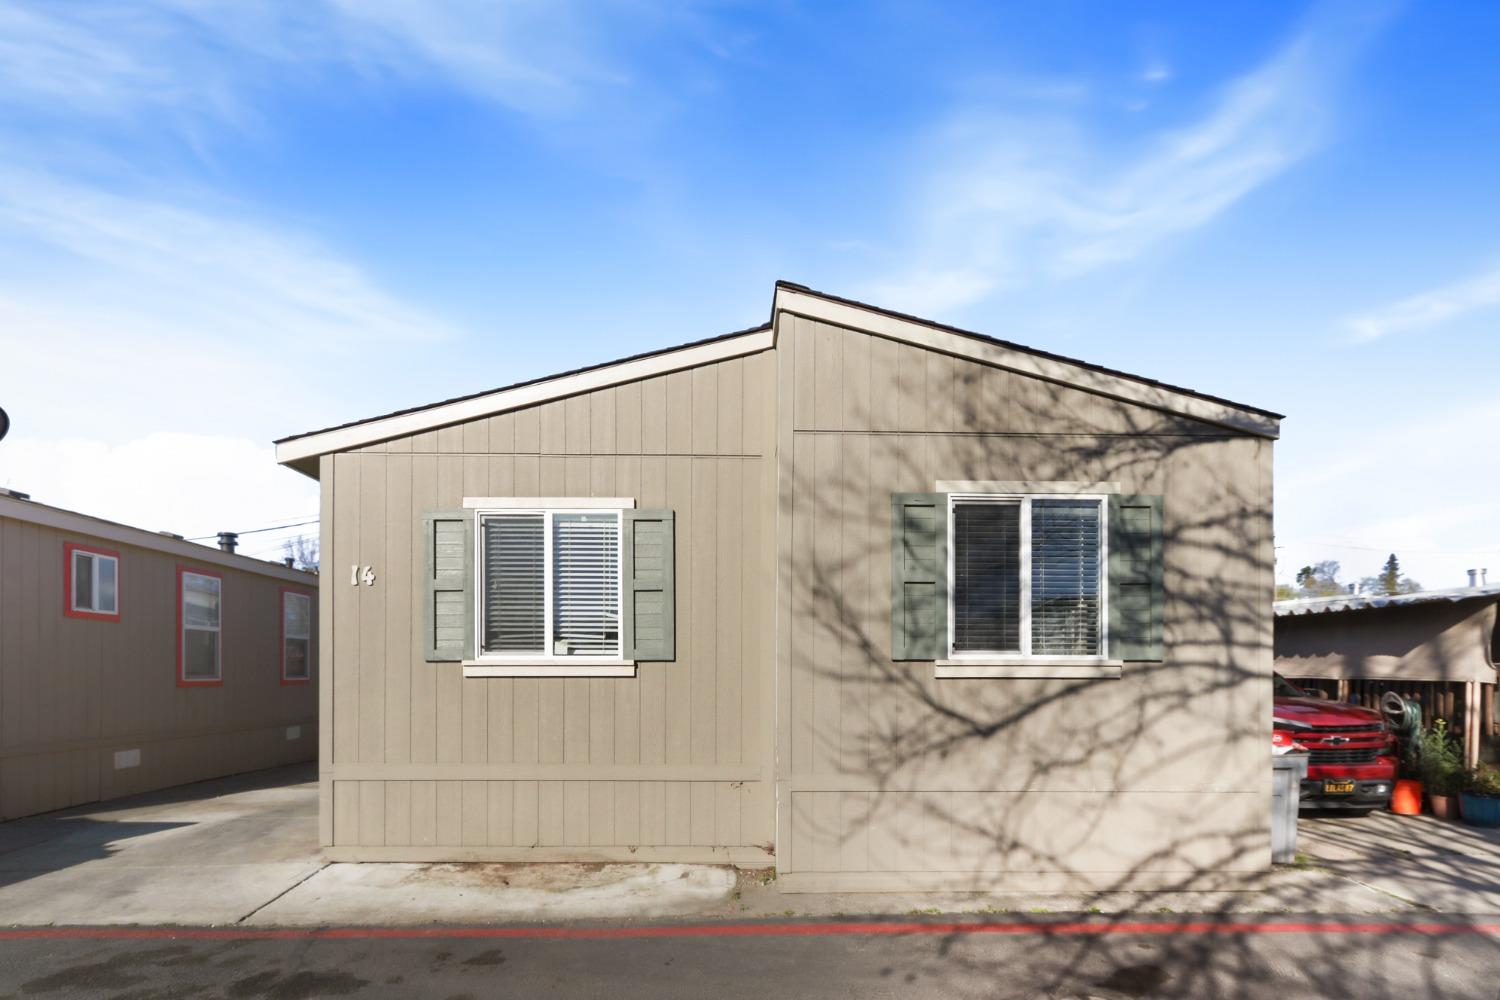 Photo of 1224 E Gum Ave #14 in Woodland, CA